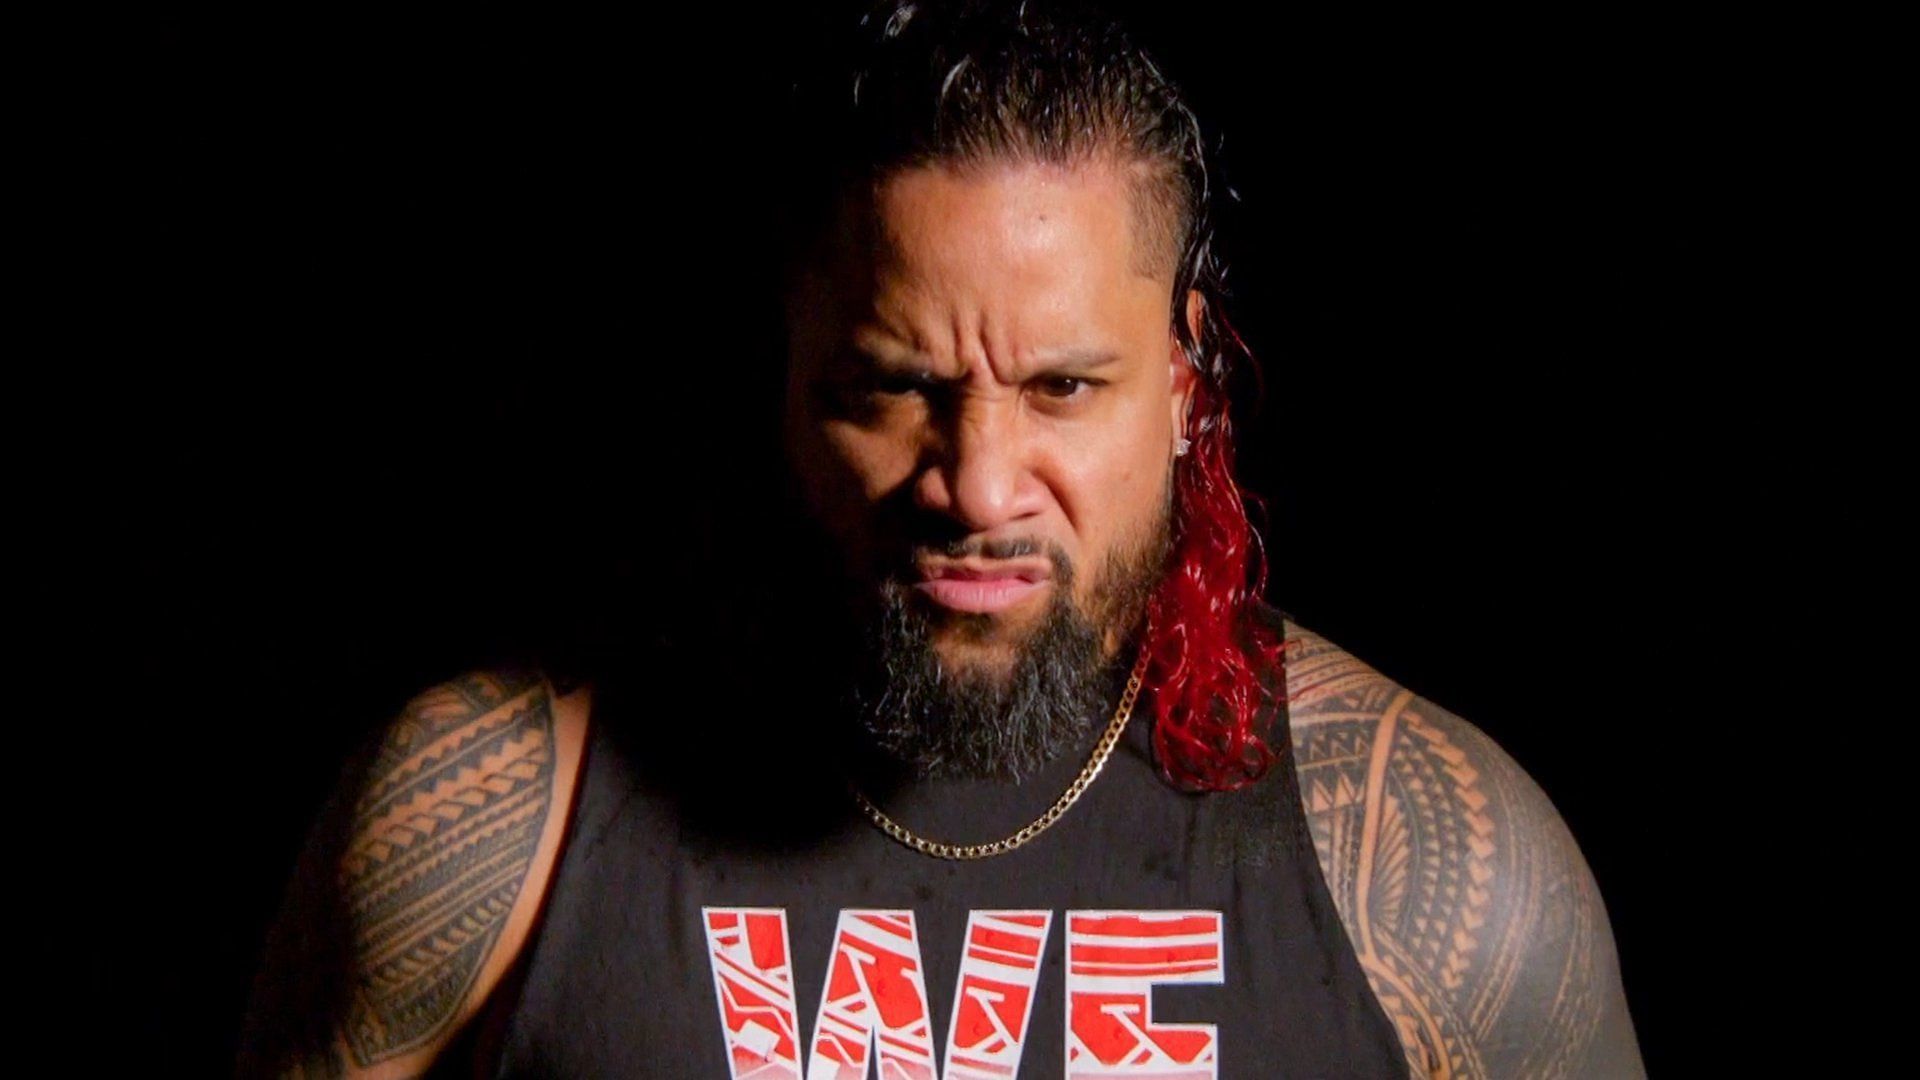 Jimmy Uso was worried about Nick Aldis